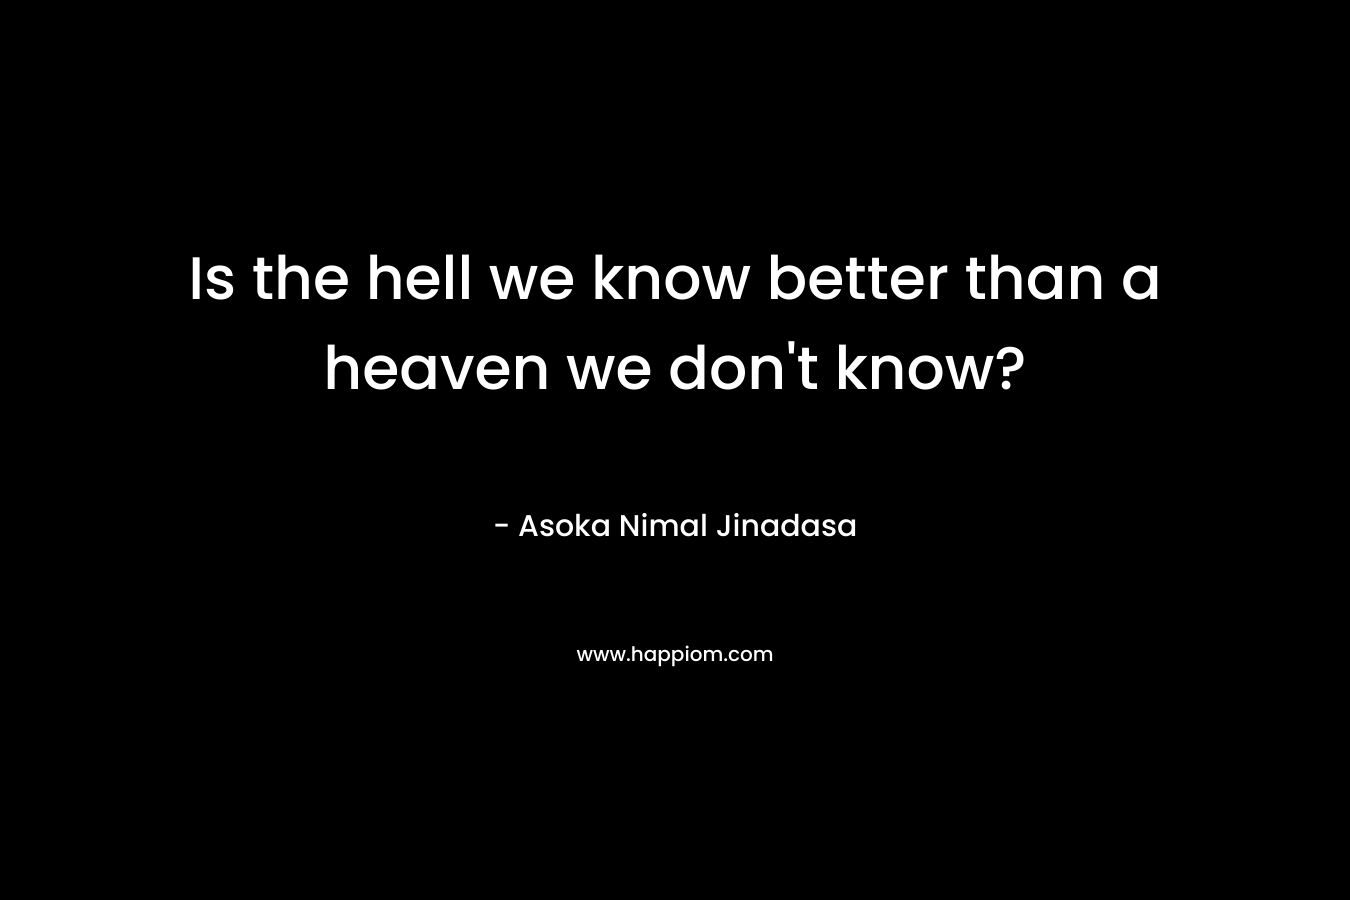 Is the hell we know better than a heaven we don't know?